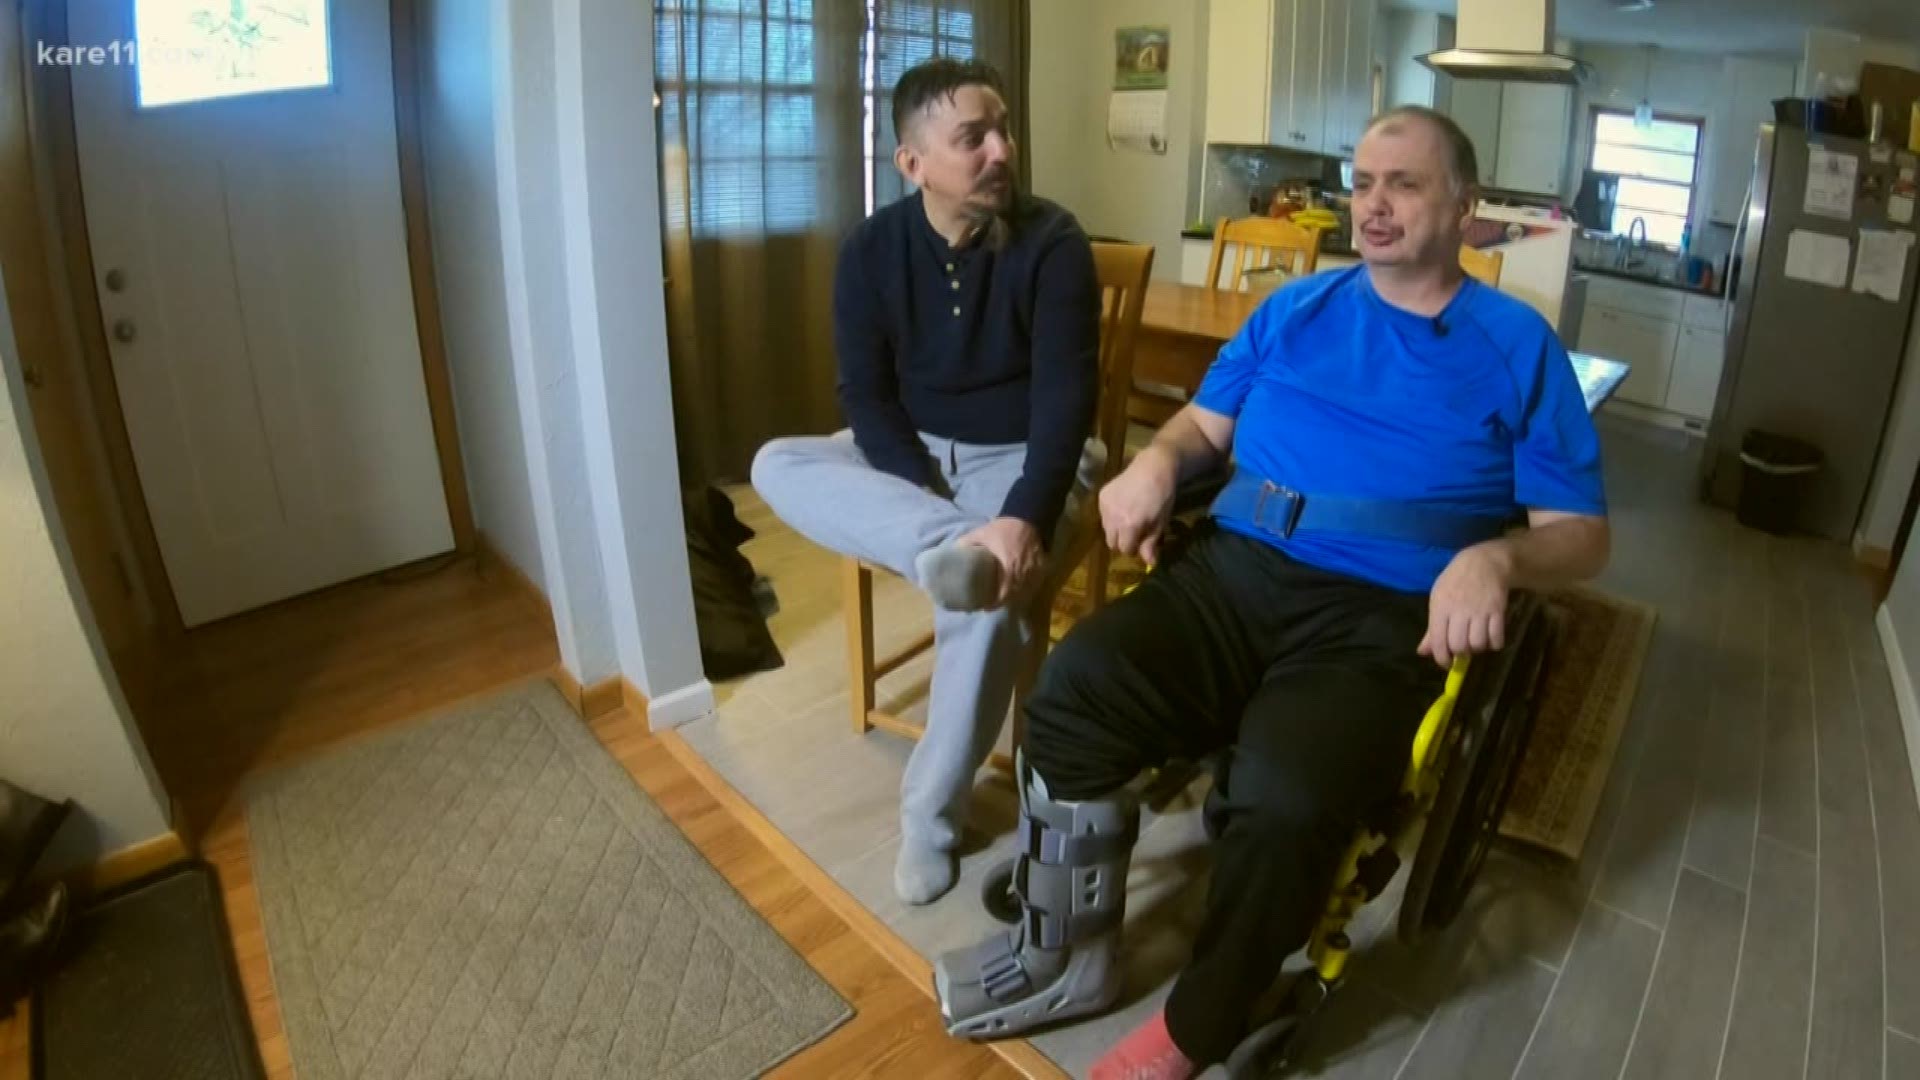 Rumi matches caregivers to people living with disabilities; the goal is to help both sides find a compatible roommate.